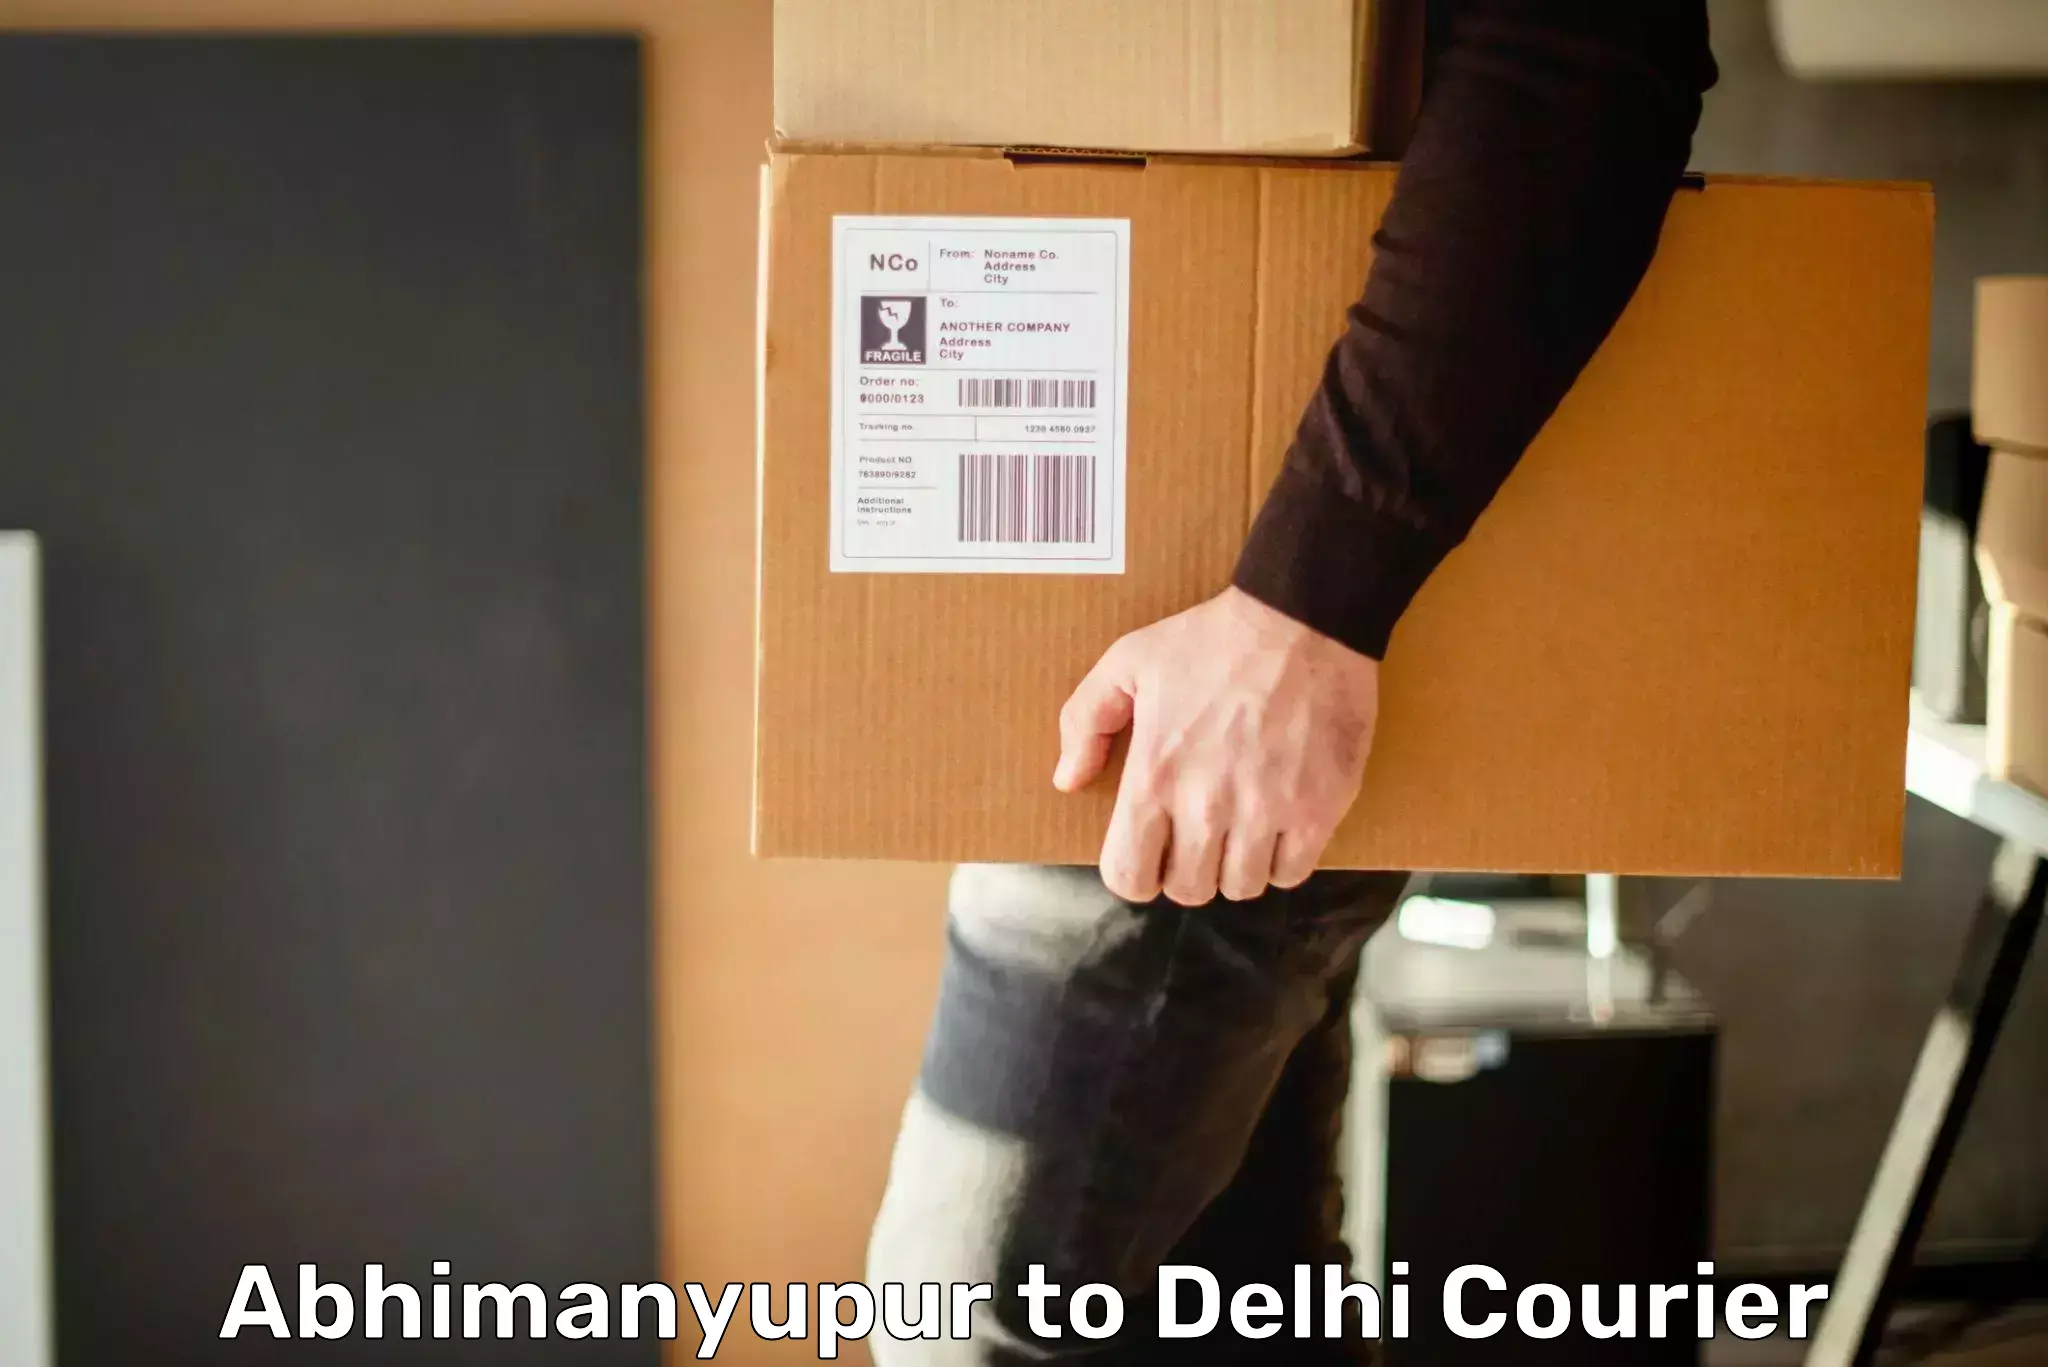 Reliable delivery network Abhimanyupur to Delhi